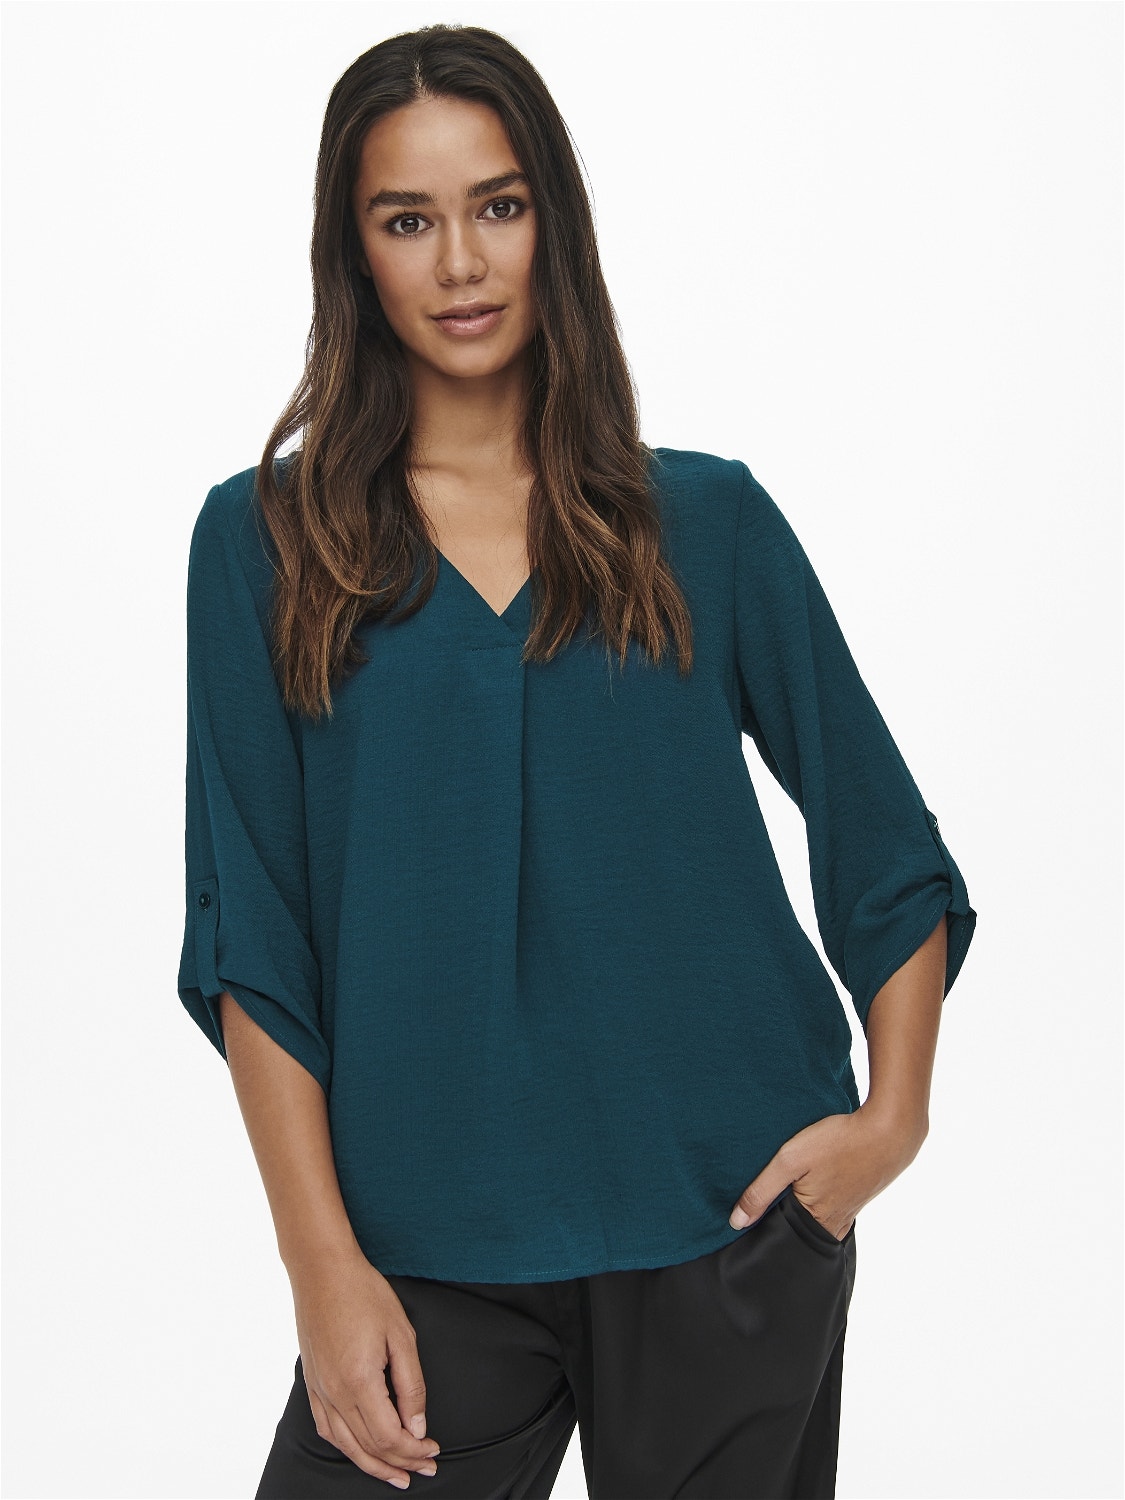 ONLY Tops Loose Fit Col en V Poignets repliés Manches volumineuses -Reflecting Pond - 15226911